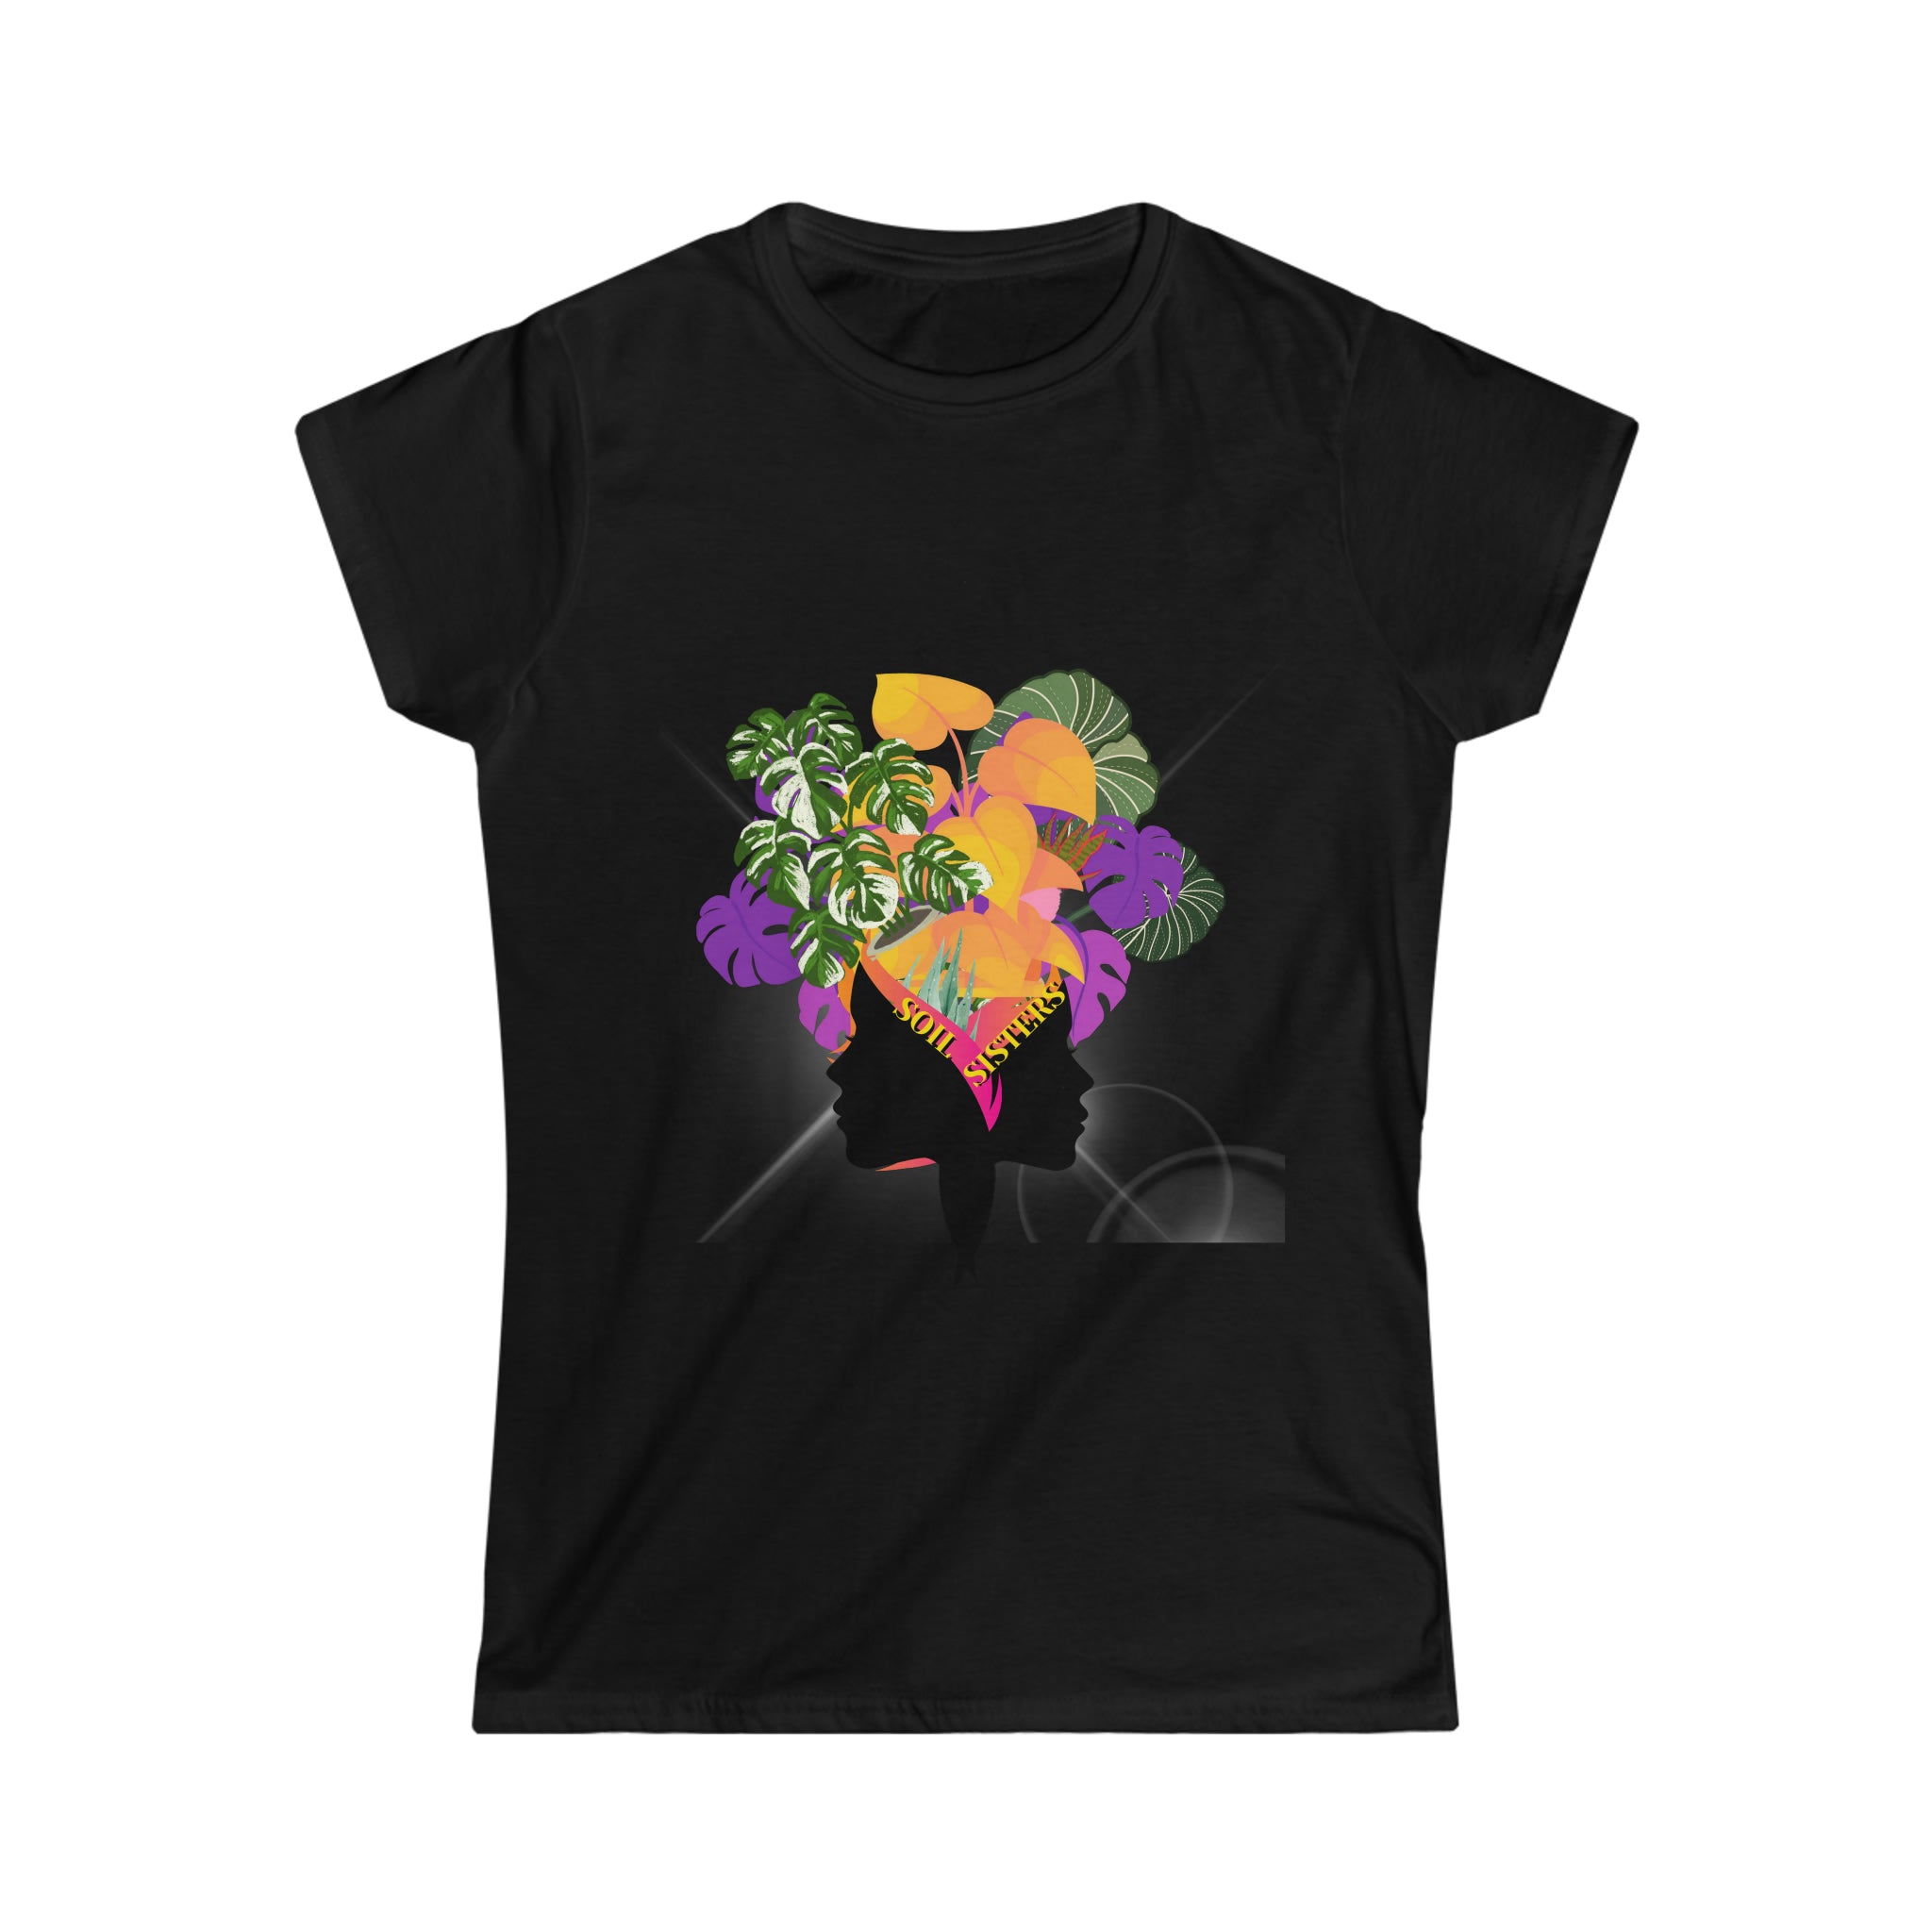 The Exclusive "Soil Sisters" by Luv Farms Women's Softstyle Tee - SHOP LUV FARMS